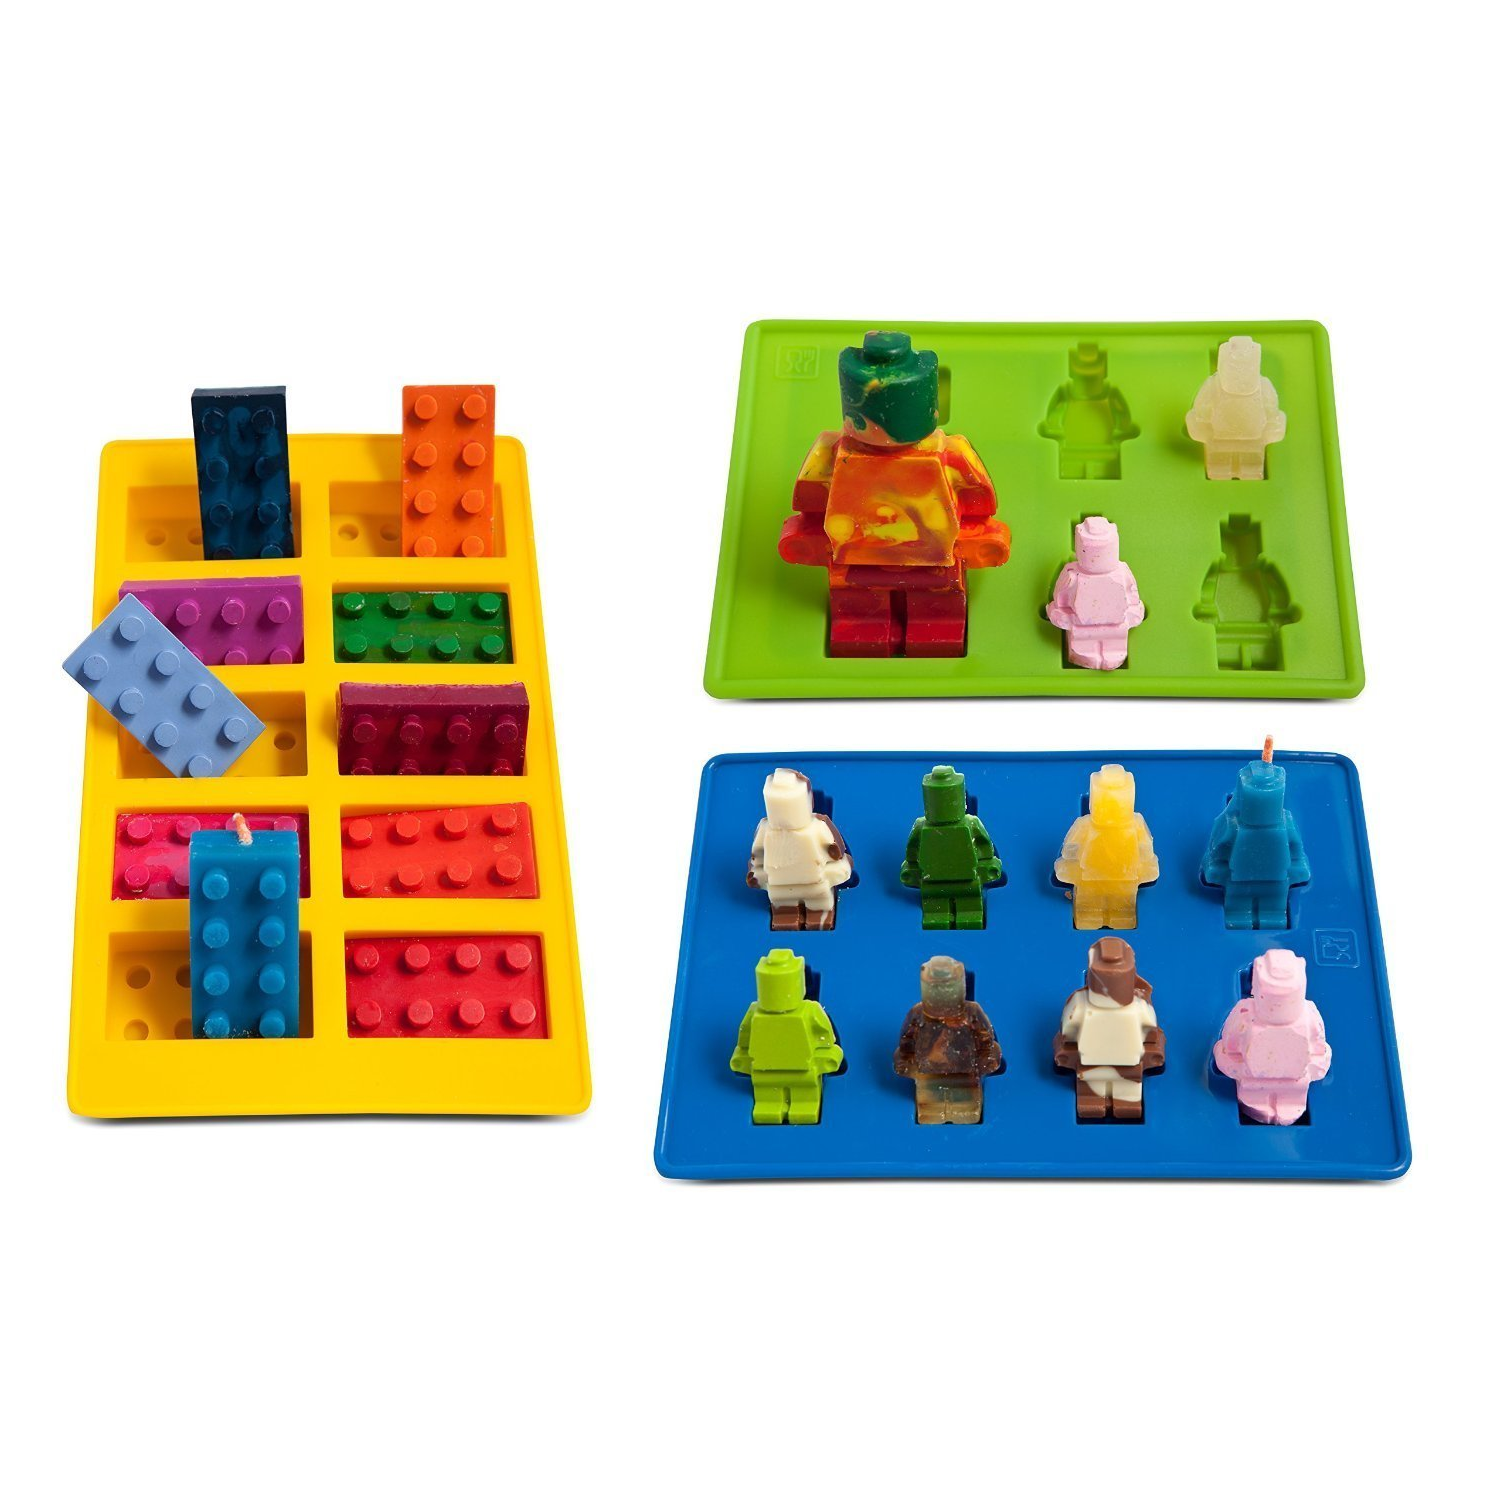 Amazon: Lucentee Silly Ice Cube Trays Candy Molds, Building Bricks and Figures with Bonus Ebook Only $7.99!